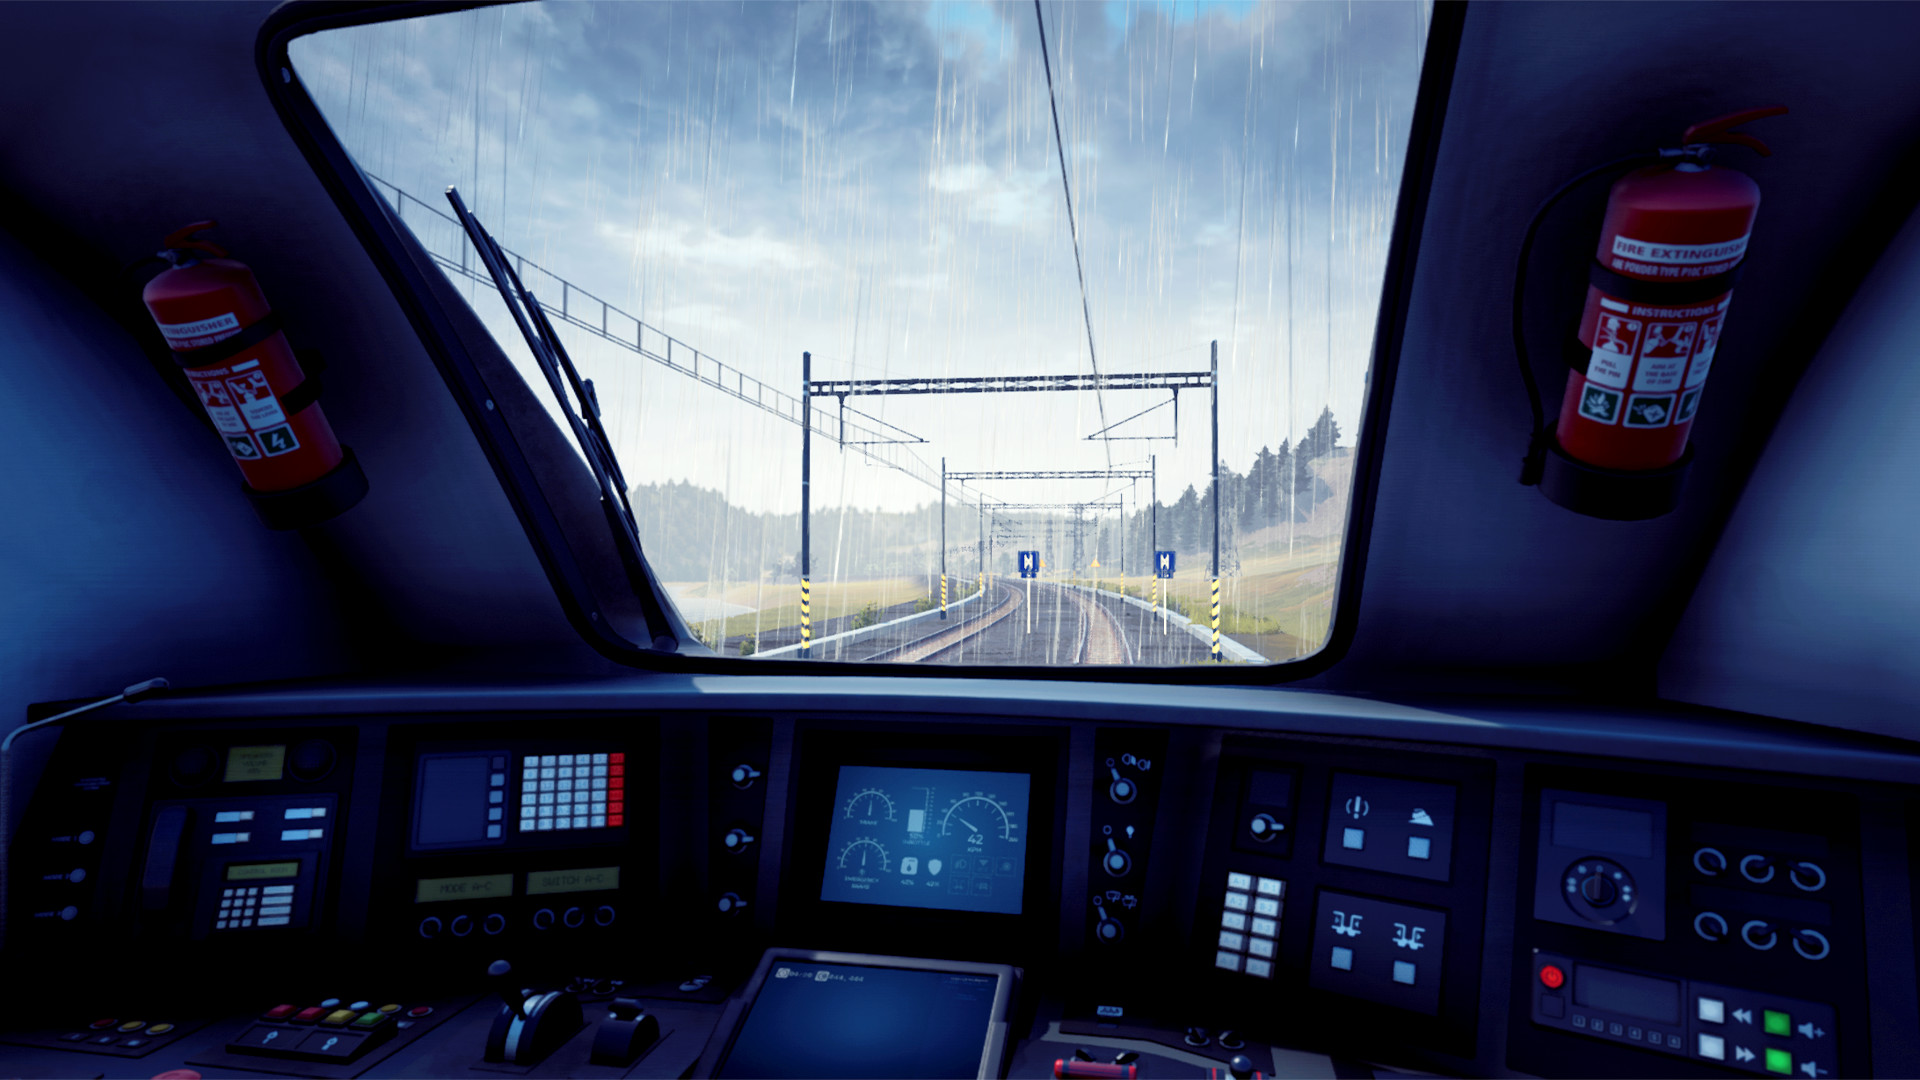 Download Train Life A Railway Simulator v0.5.1.17181 Early Access in PC [ Torrent ]